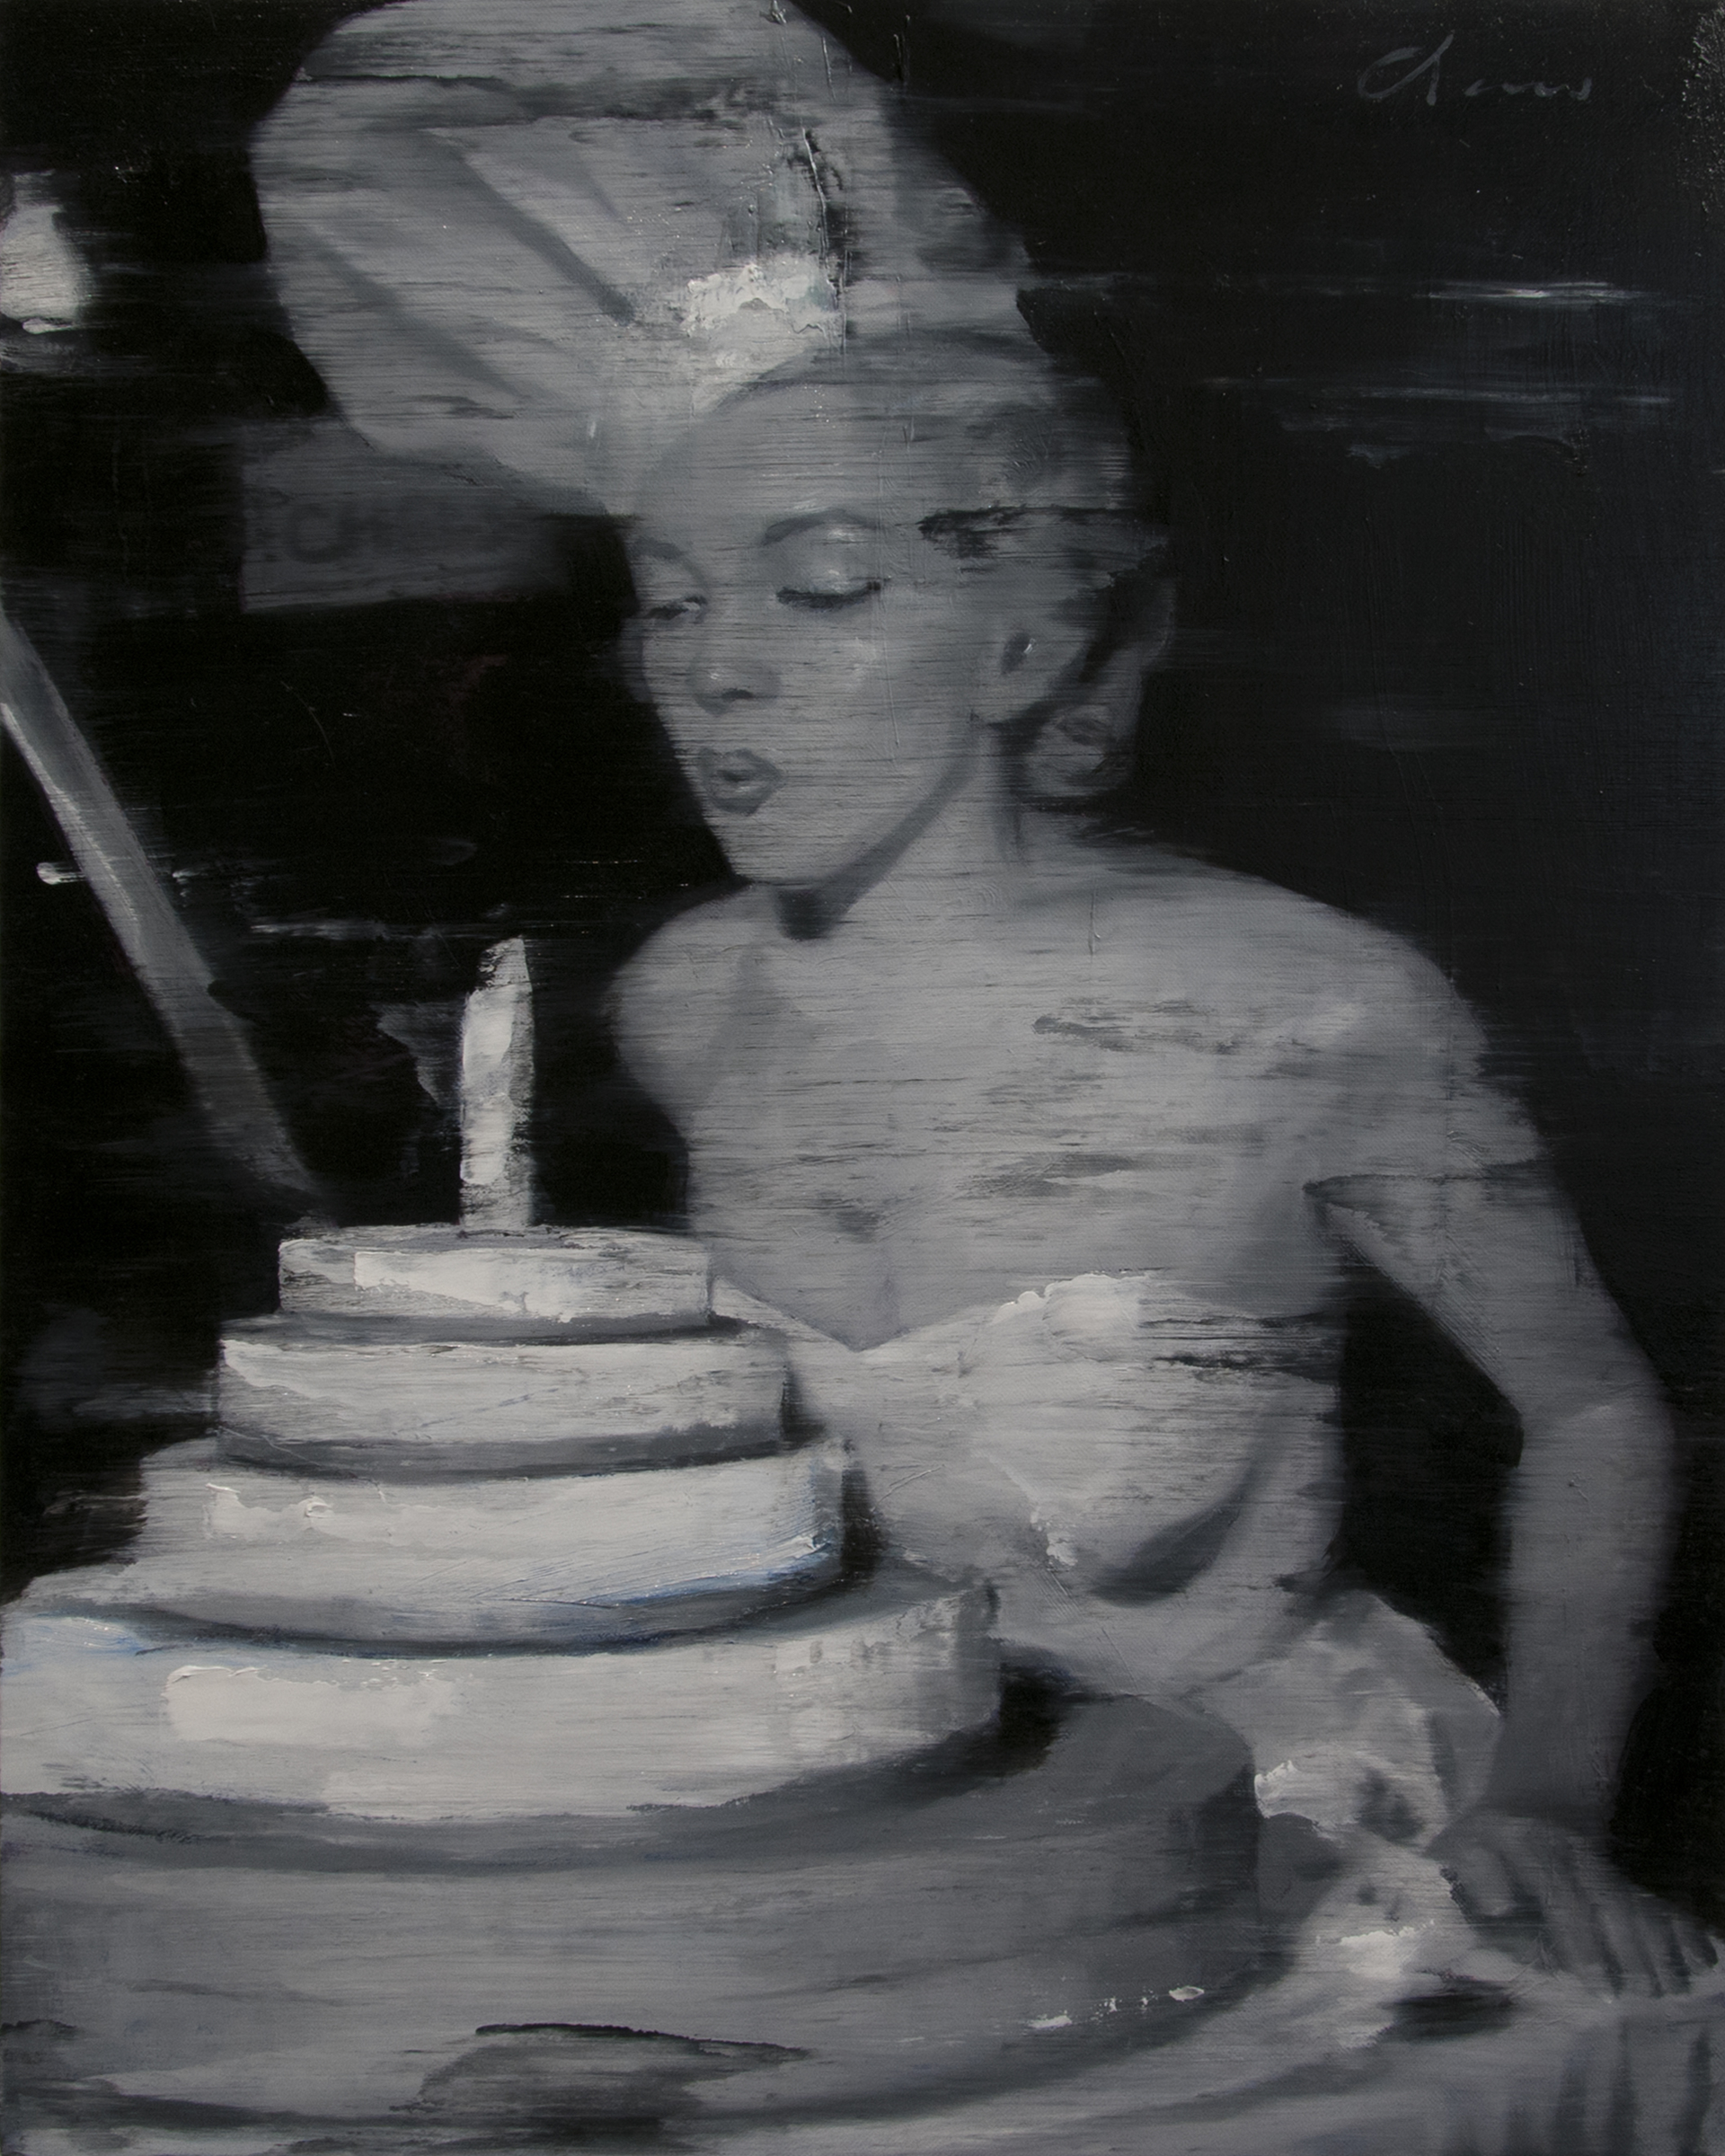 The Cake by Vincent Xeus